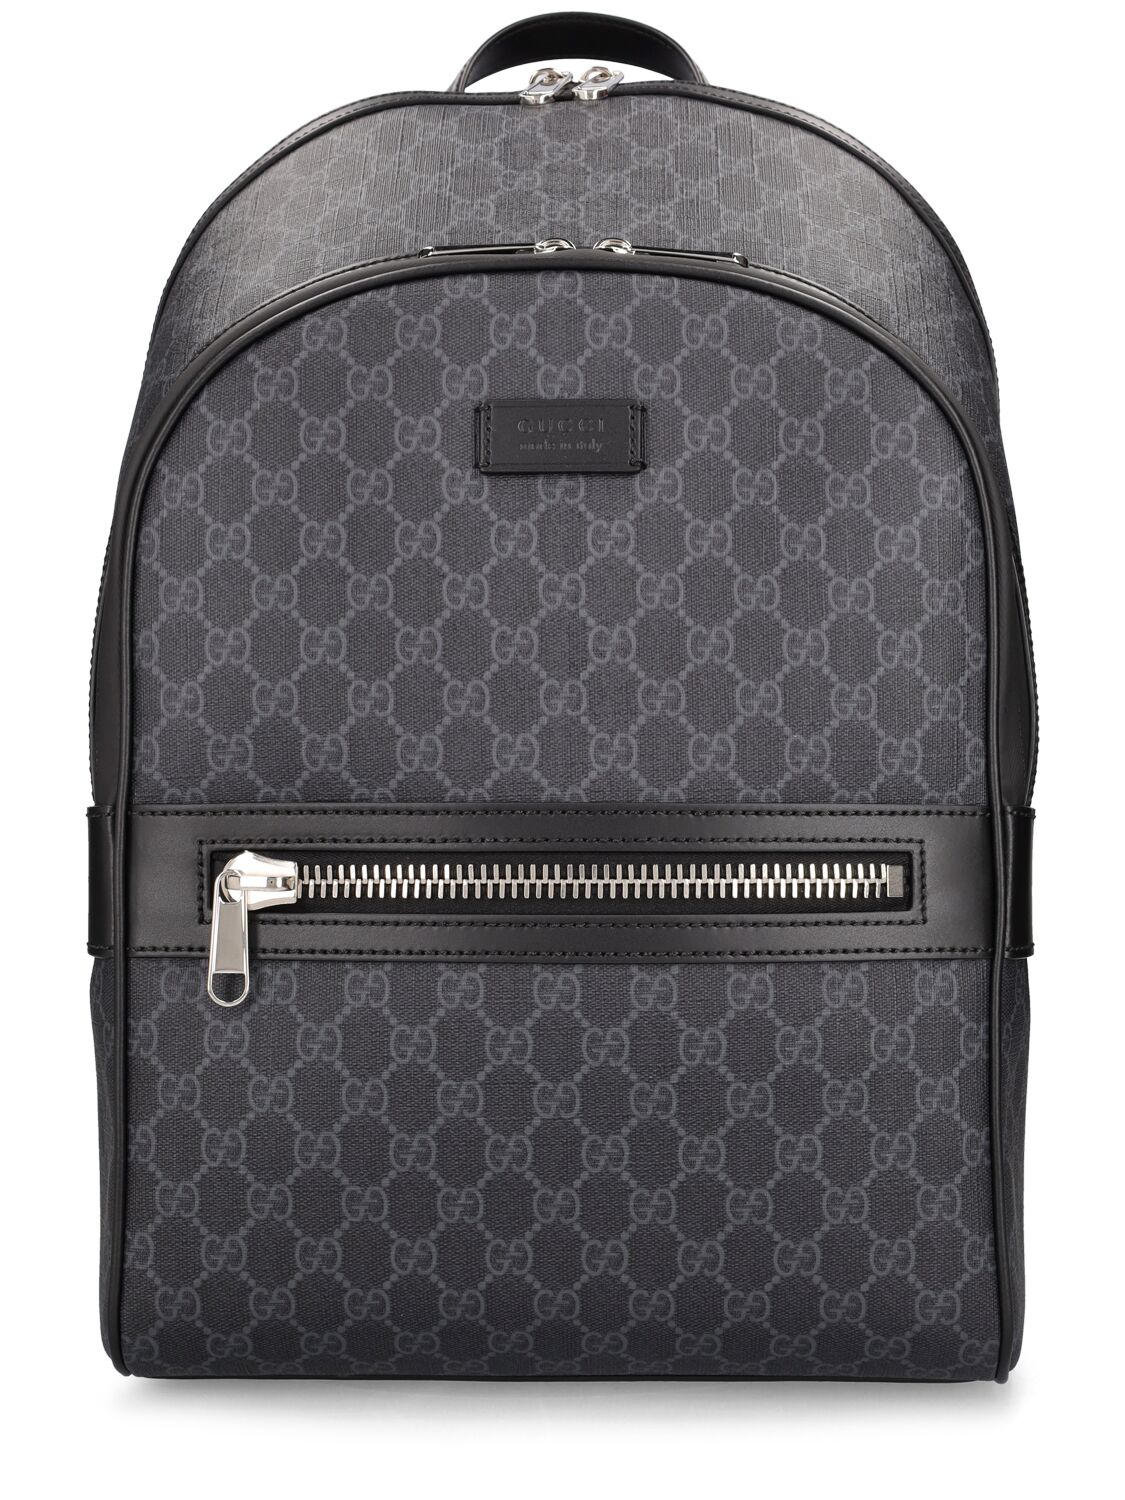 Gucci Gg Supreme Canvas Backpack In Black